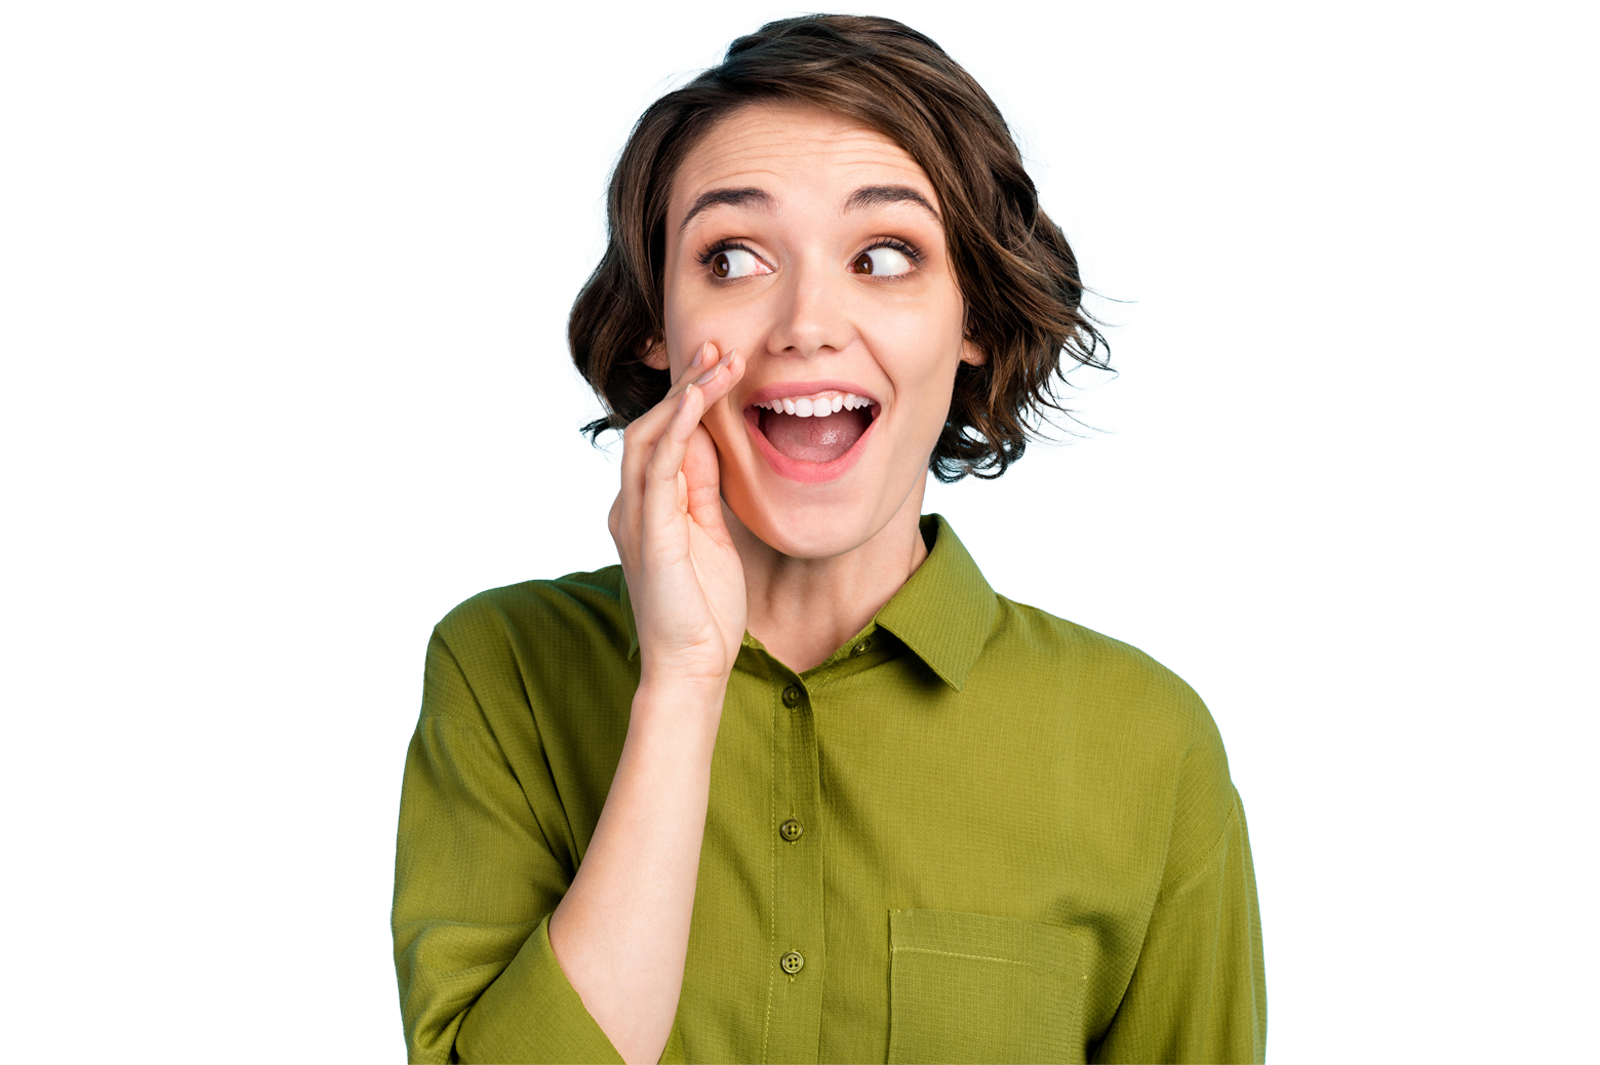 Photo portrait of girl with short hair telling secret information, rumouring gossiping wearing green shirt